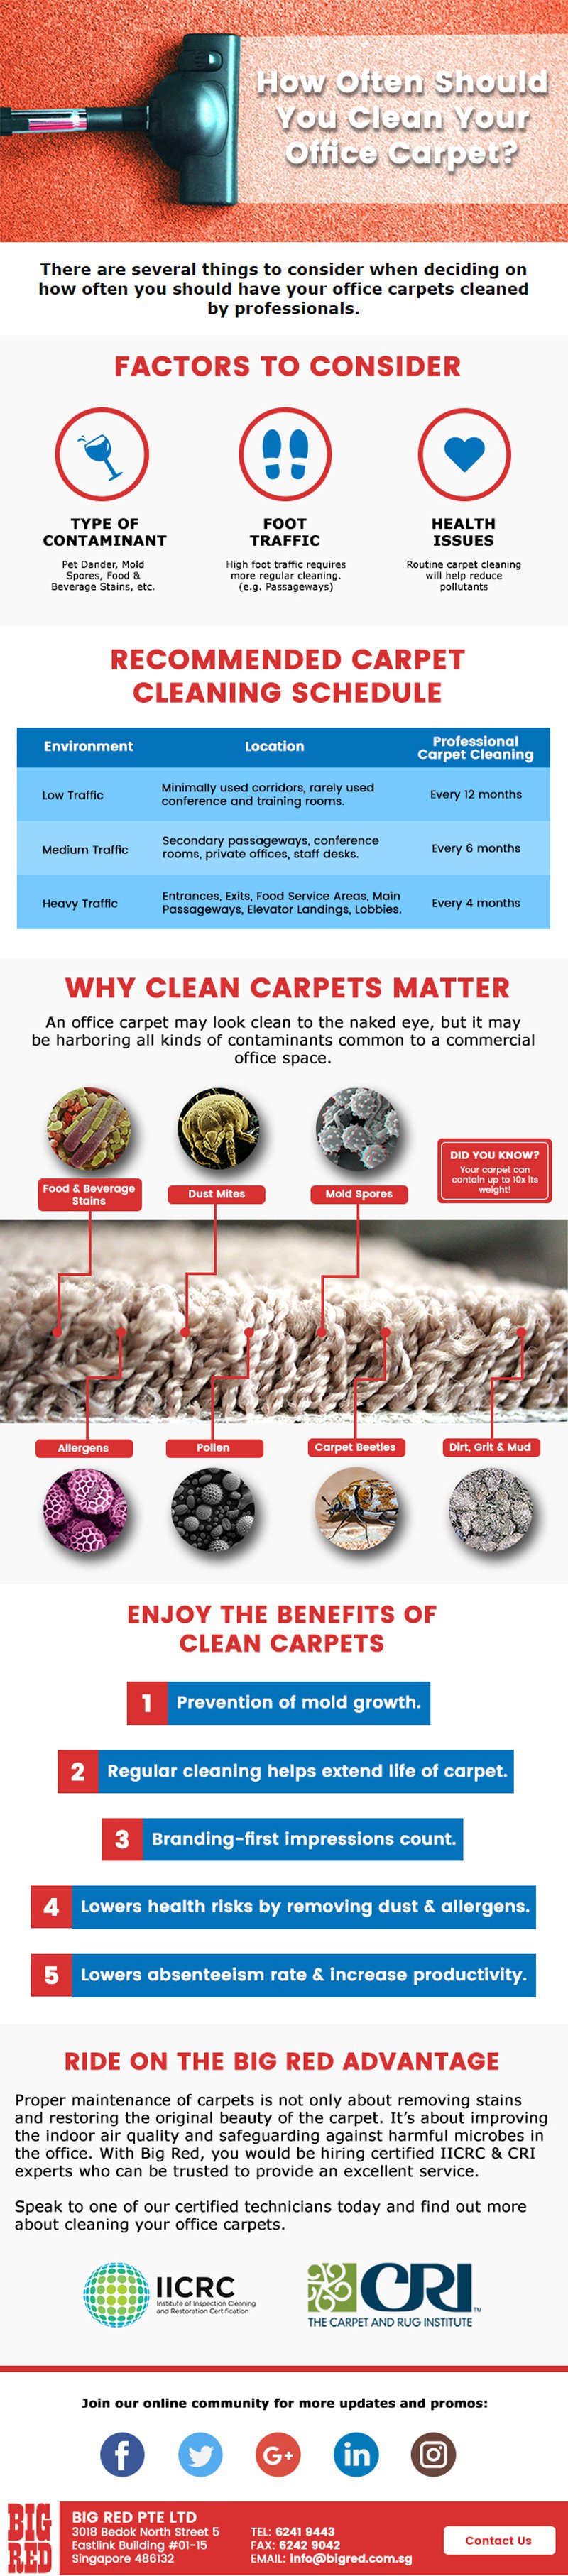 How Often Should You Clean Your Office Carpet?